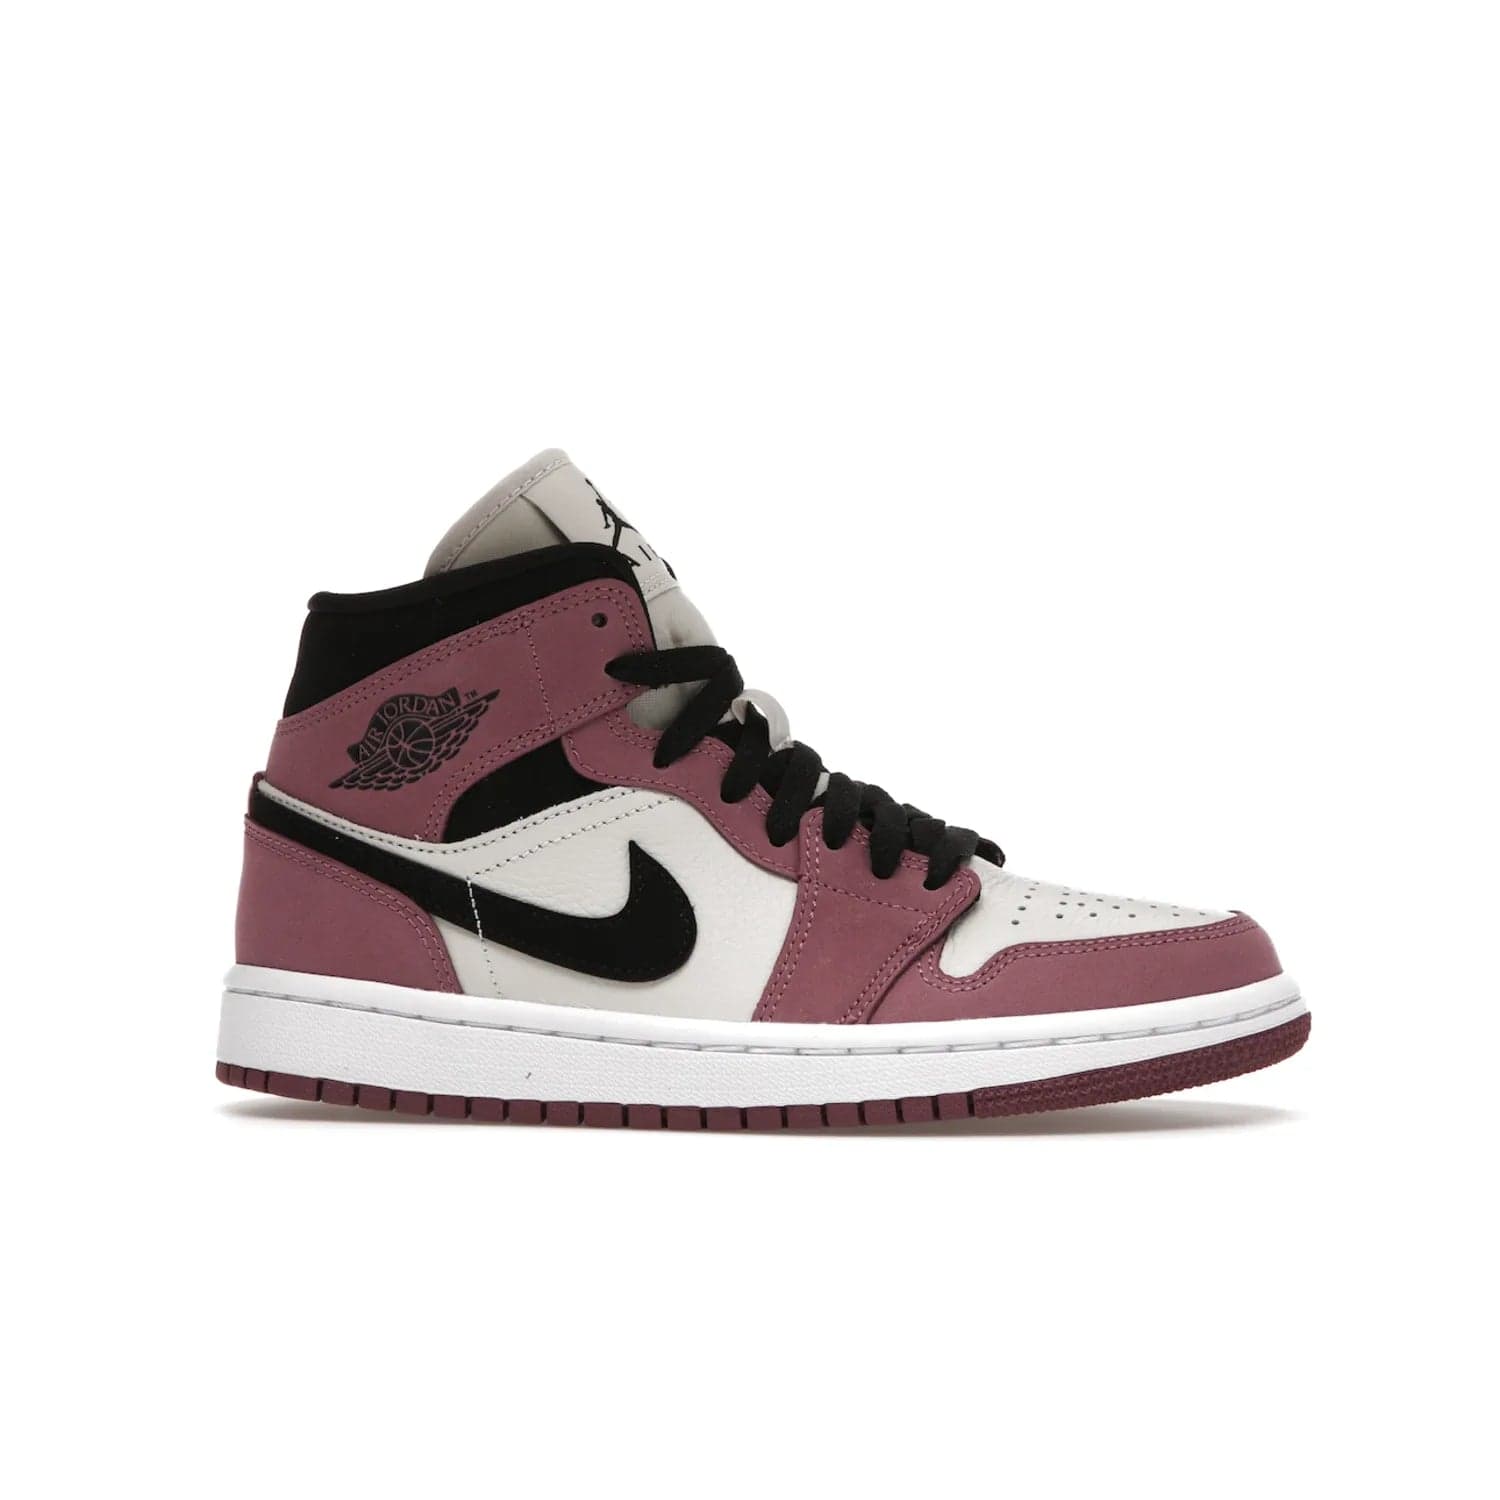 Jordan 1 Mid SE Light Mulberry (Women's) - Image 2 - Only at www.BallersClubKickz.com - Classic style meets performance with the Air Jordan 1 Mid Light Mulberry (Women's). Sleek leather overlays and light bone detailing bring out the best of this classic sneaker, perfect for the active woman on-the-go. Available March 2022.